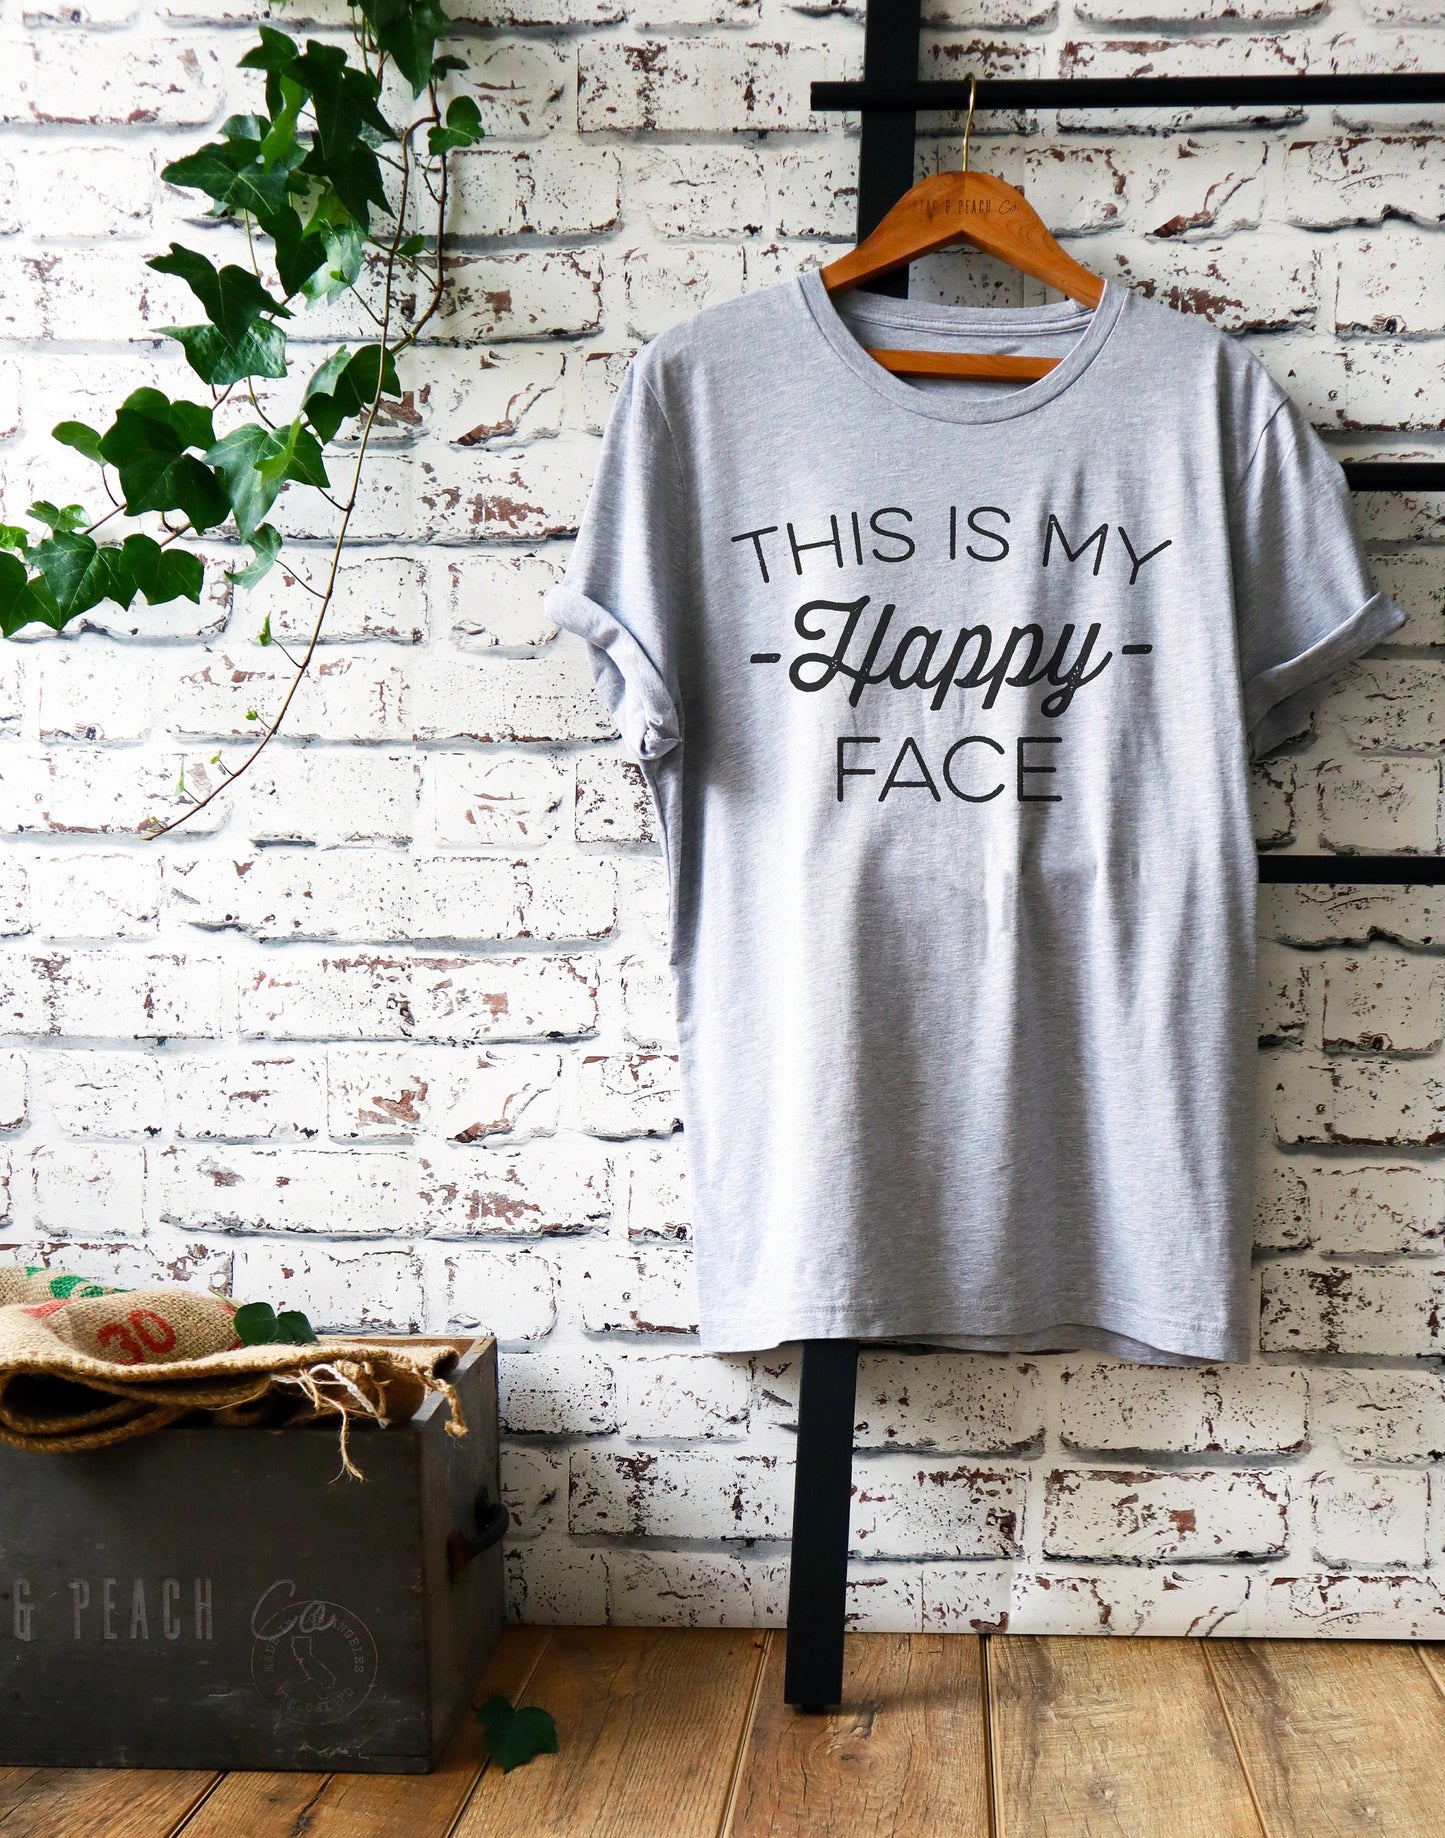 This Is My Happy Face Unisex Shirt - Attitude Shirt, Funny Sarcastic Tee, Snarky Shirt, Workout Top, Birthday Gift, Sassy Shirt, Sarcasm Tee